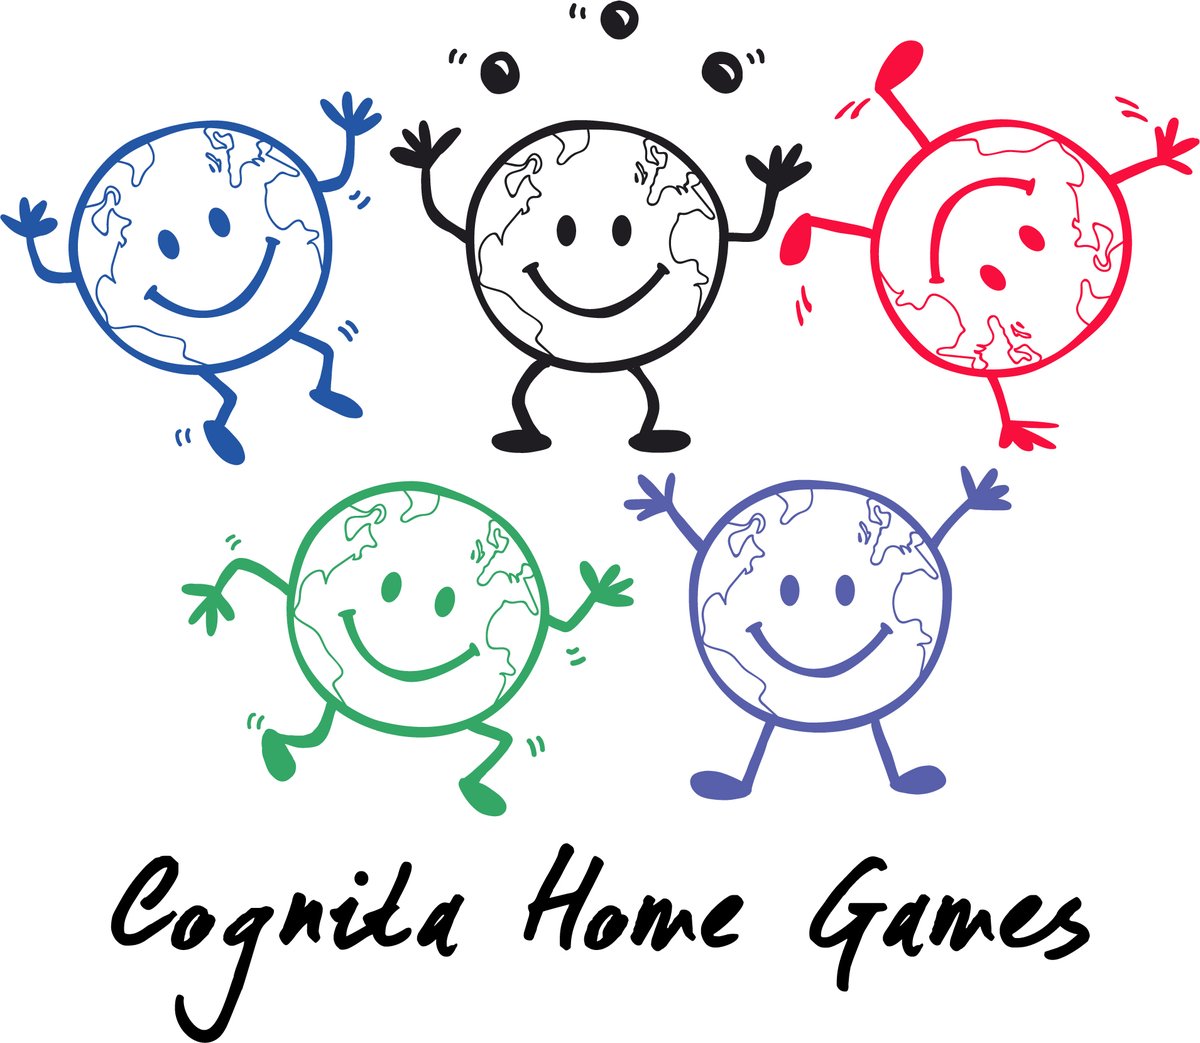 Coming to a school near you very soon! #CognitaHomeGames #CognitaWay #keepingactivetogether #globalwellbeing